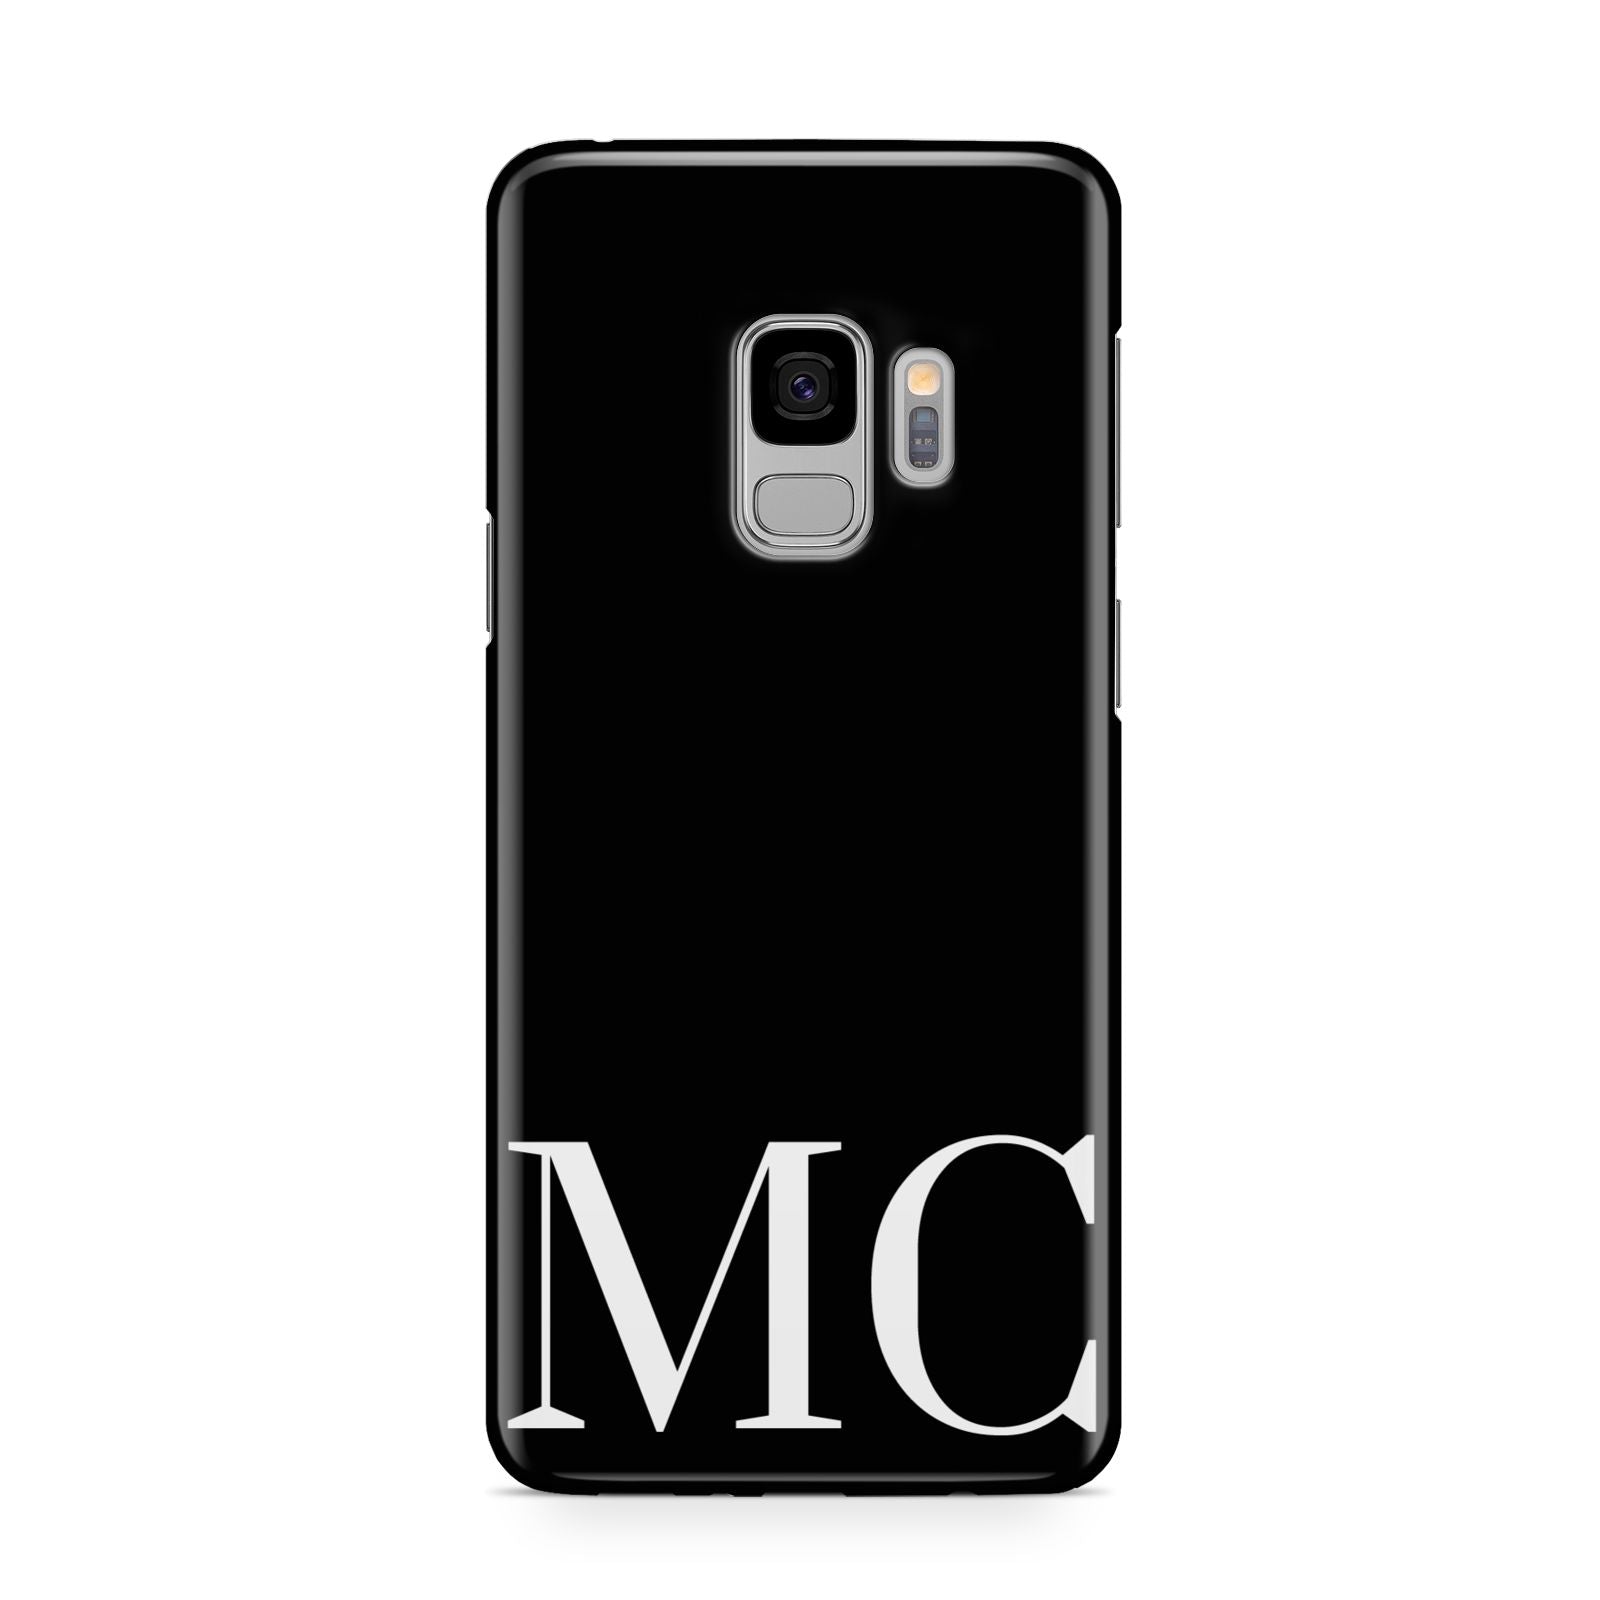 Initials Personalised 1 Samsung Galaxy S9 Case